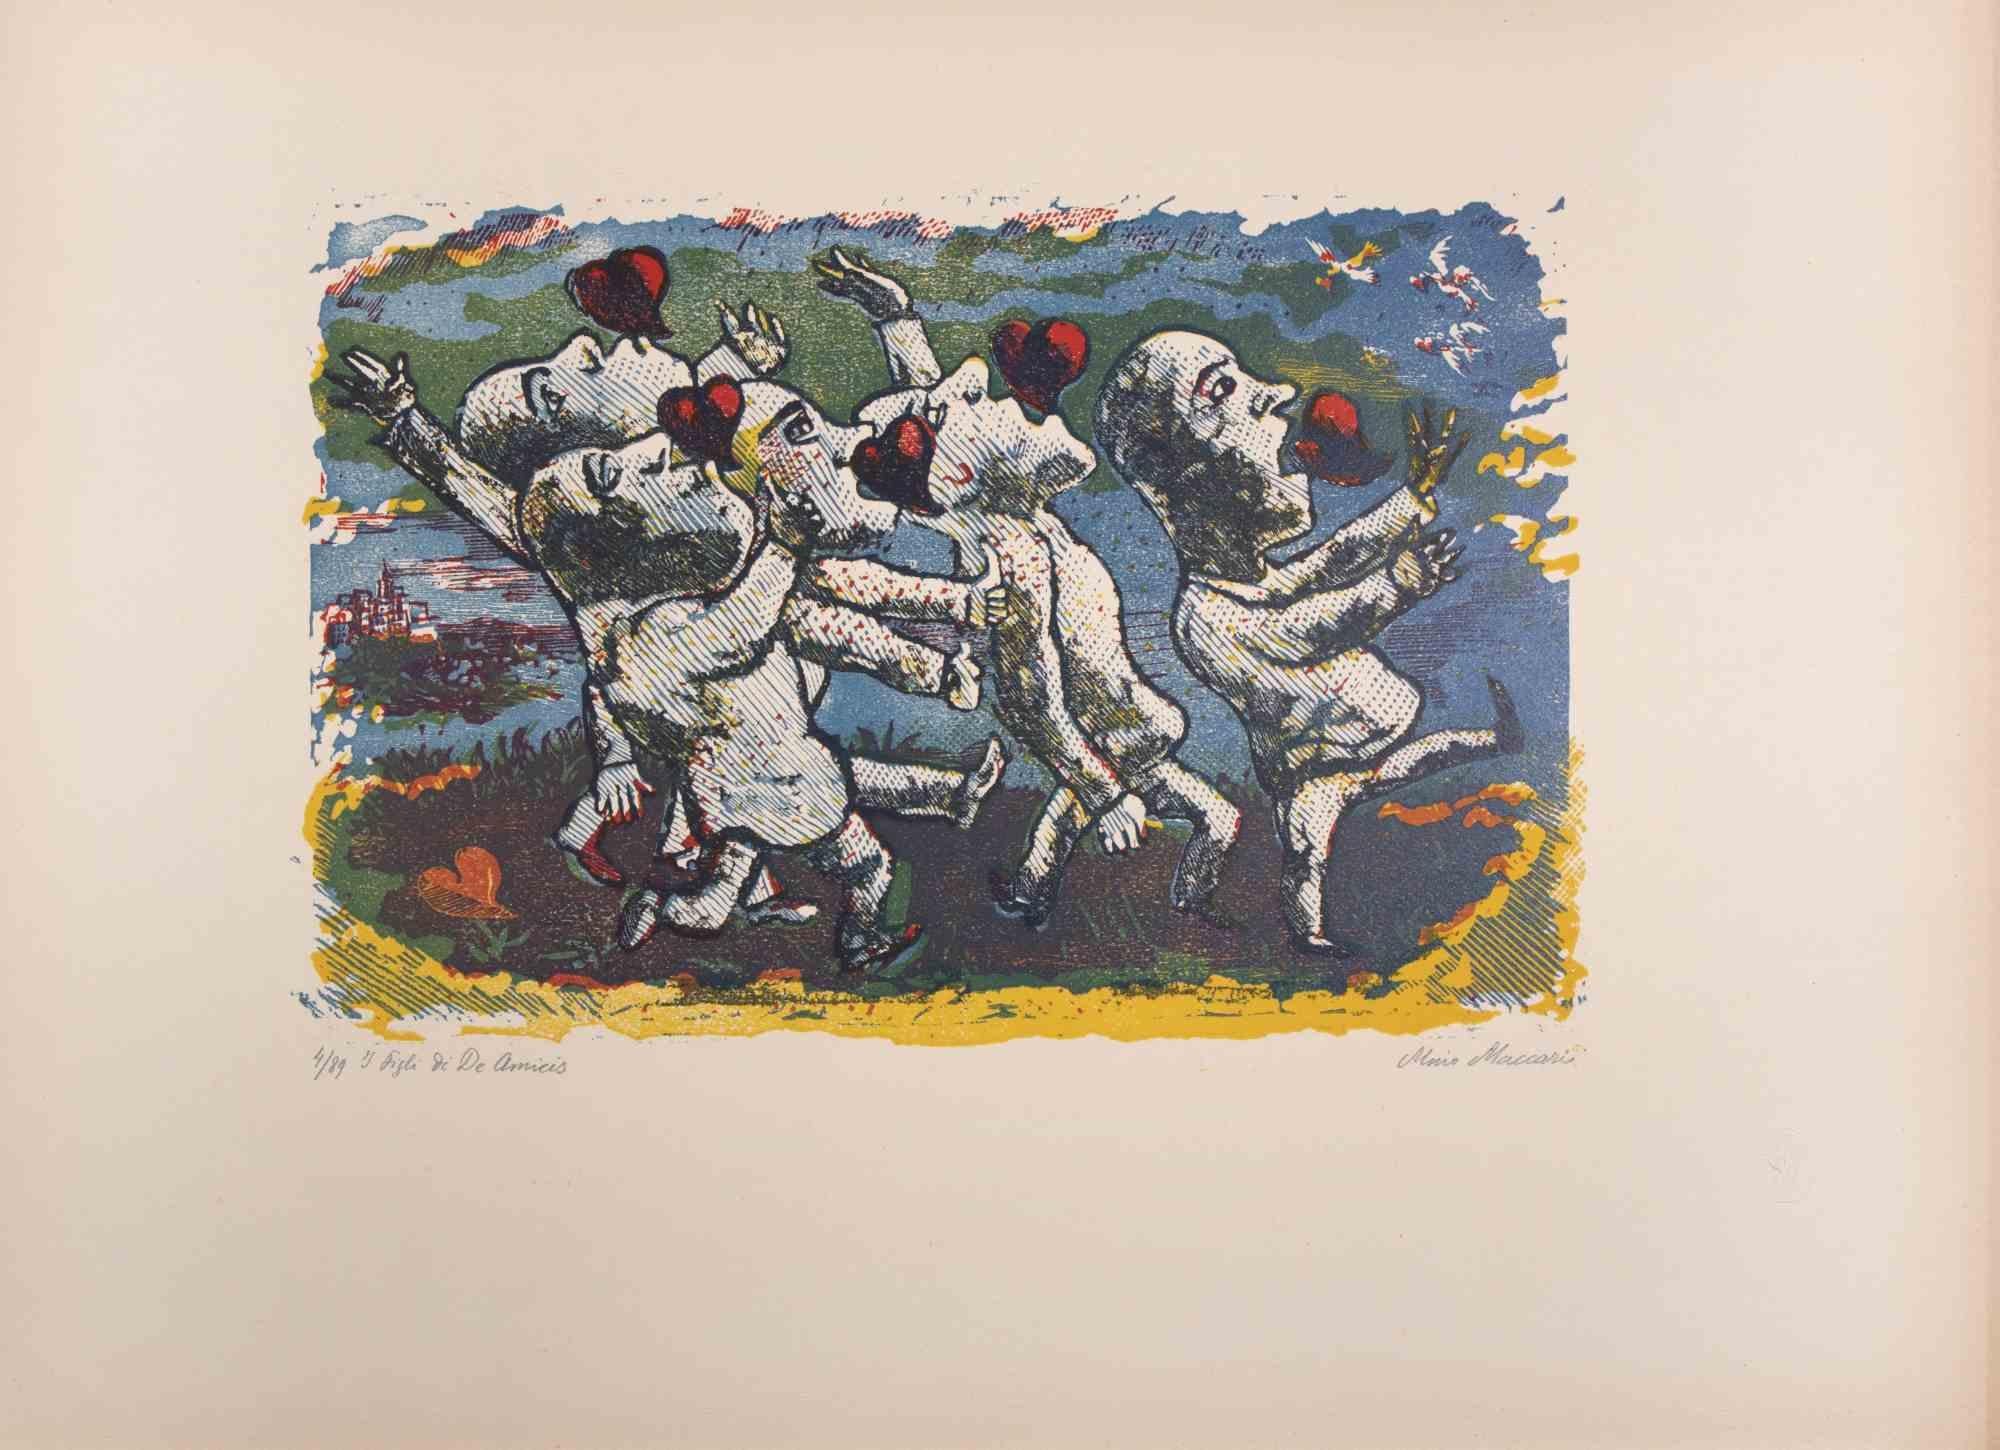 De Amicis's sons is an Artwork realized by Mino Maccari  (1924-1989) in 1943.

Colored woodcut on paper. Hand-signed on the lower, numbered 4/89 specimens and titled on the left margin.

Good conditions.

Mino Maccari (Siena, 1924-Rome, June 16,